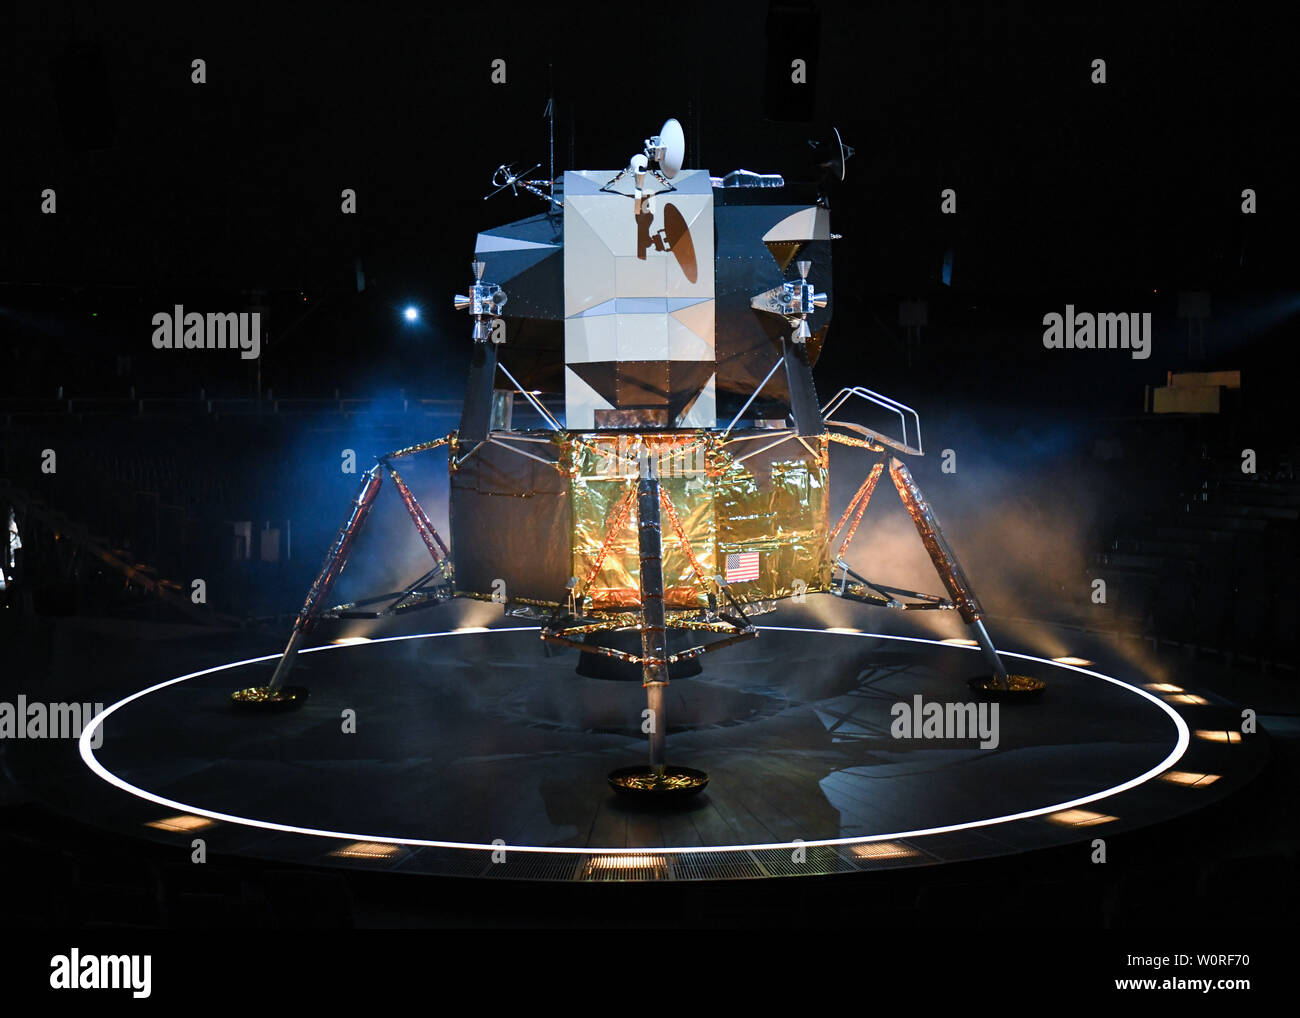 June 27, 2019 Pasadena, California, U.S.: A general view of the Apollo 11 Lunar Module in the theater of the Lunar Dome for the Apollo 11 media preview event at Rose Bowl in Pasadena. Credit: Billy Bennight/ZUMA Wire/Alamy Live News Stock Photo